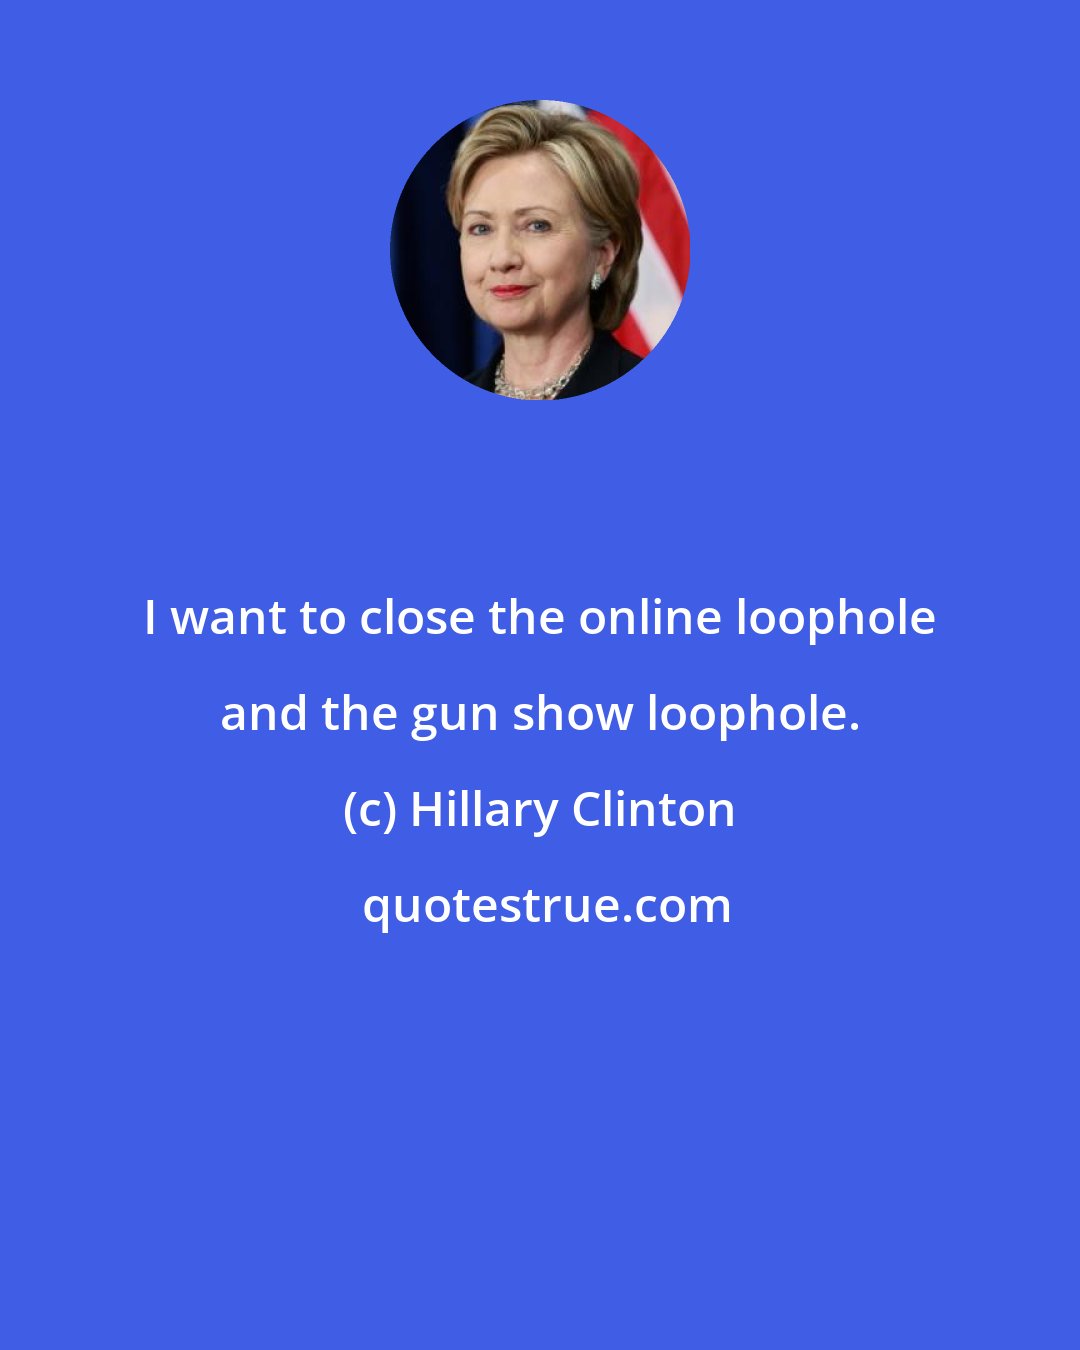 Hillary Clinton: I want to close the online loophole and the gun show loophole.